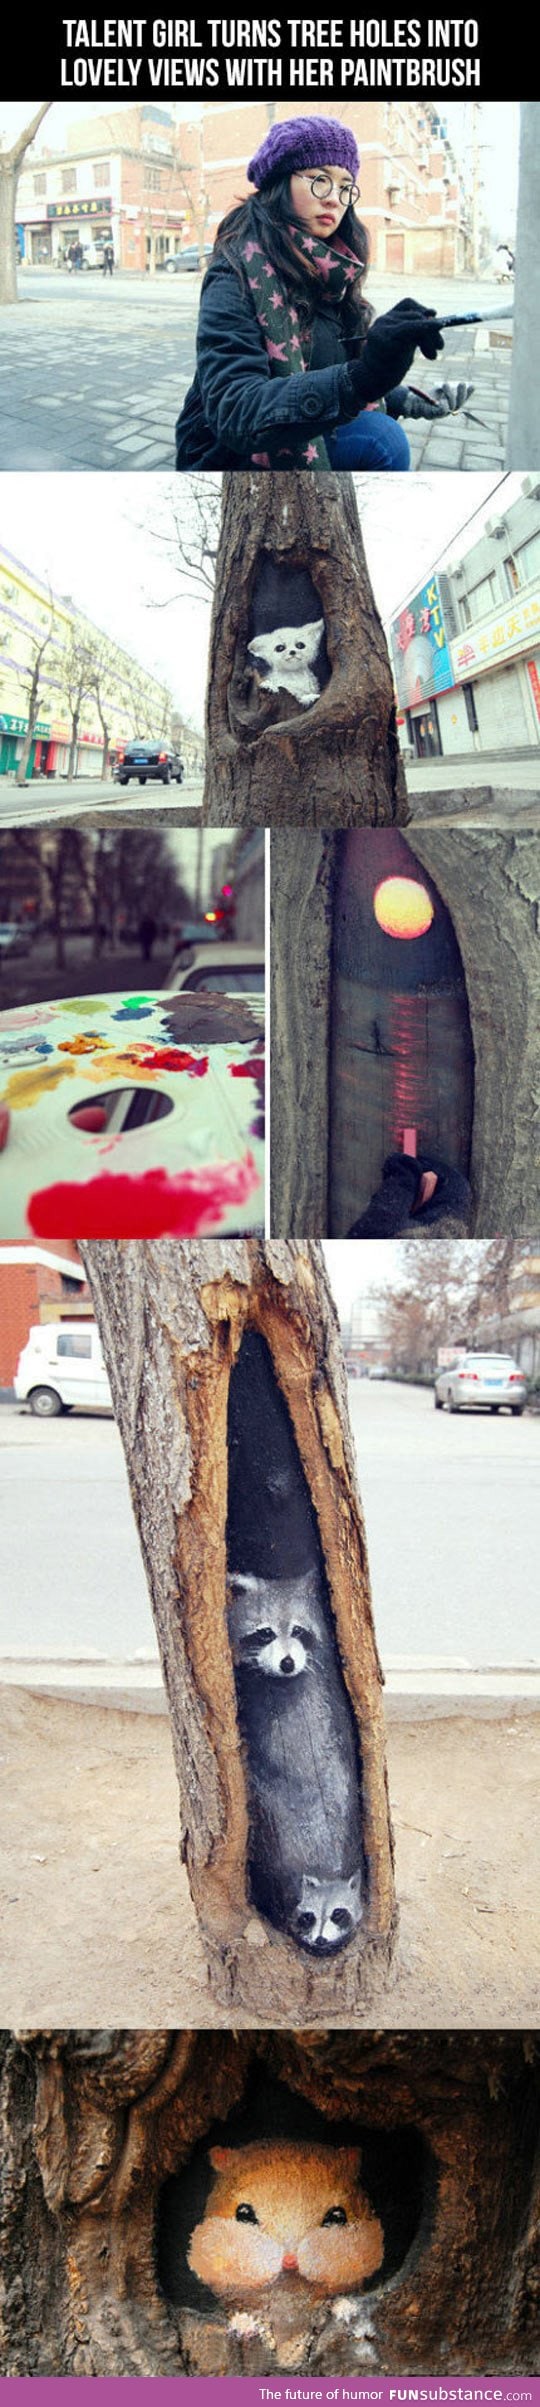 Creating art with tree holes